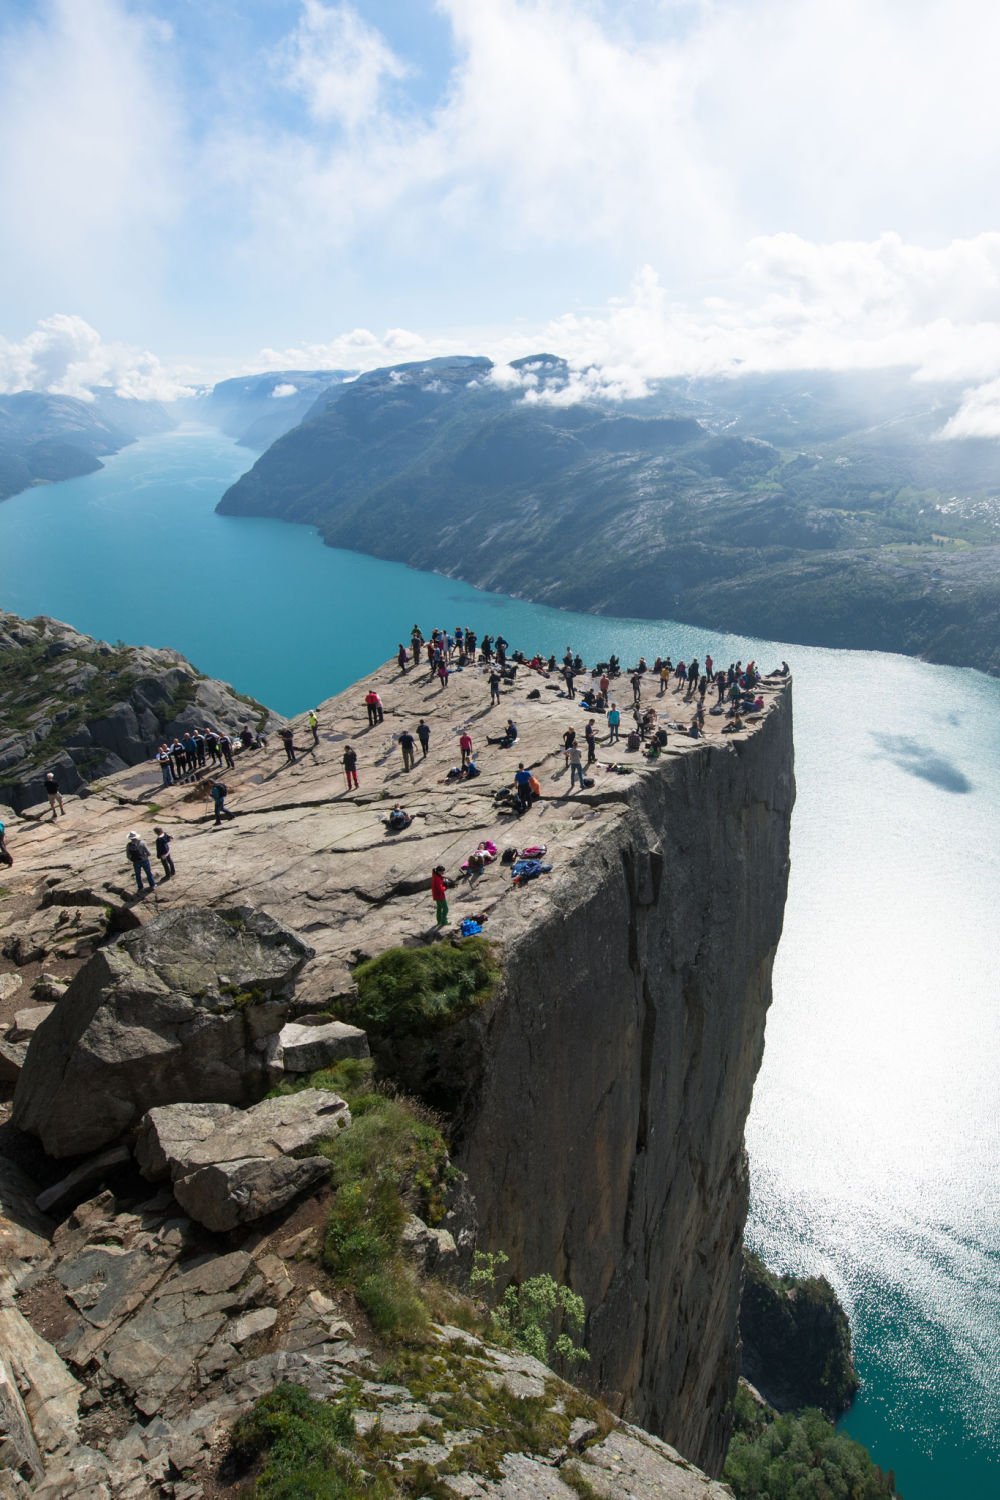 View of the Lysefjord with Pulpit Rock in the foreground.